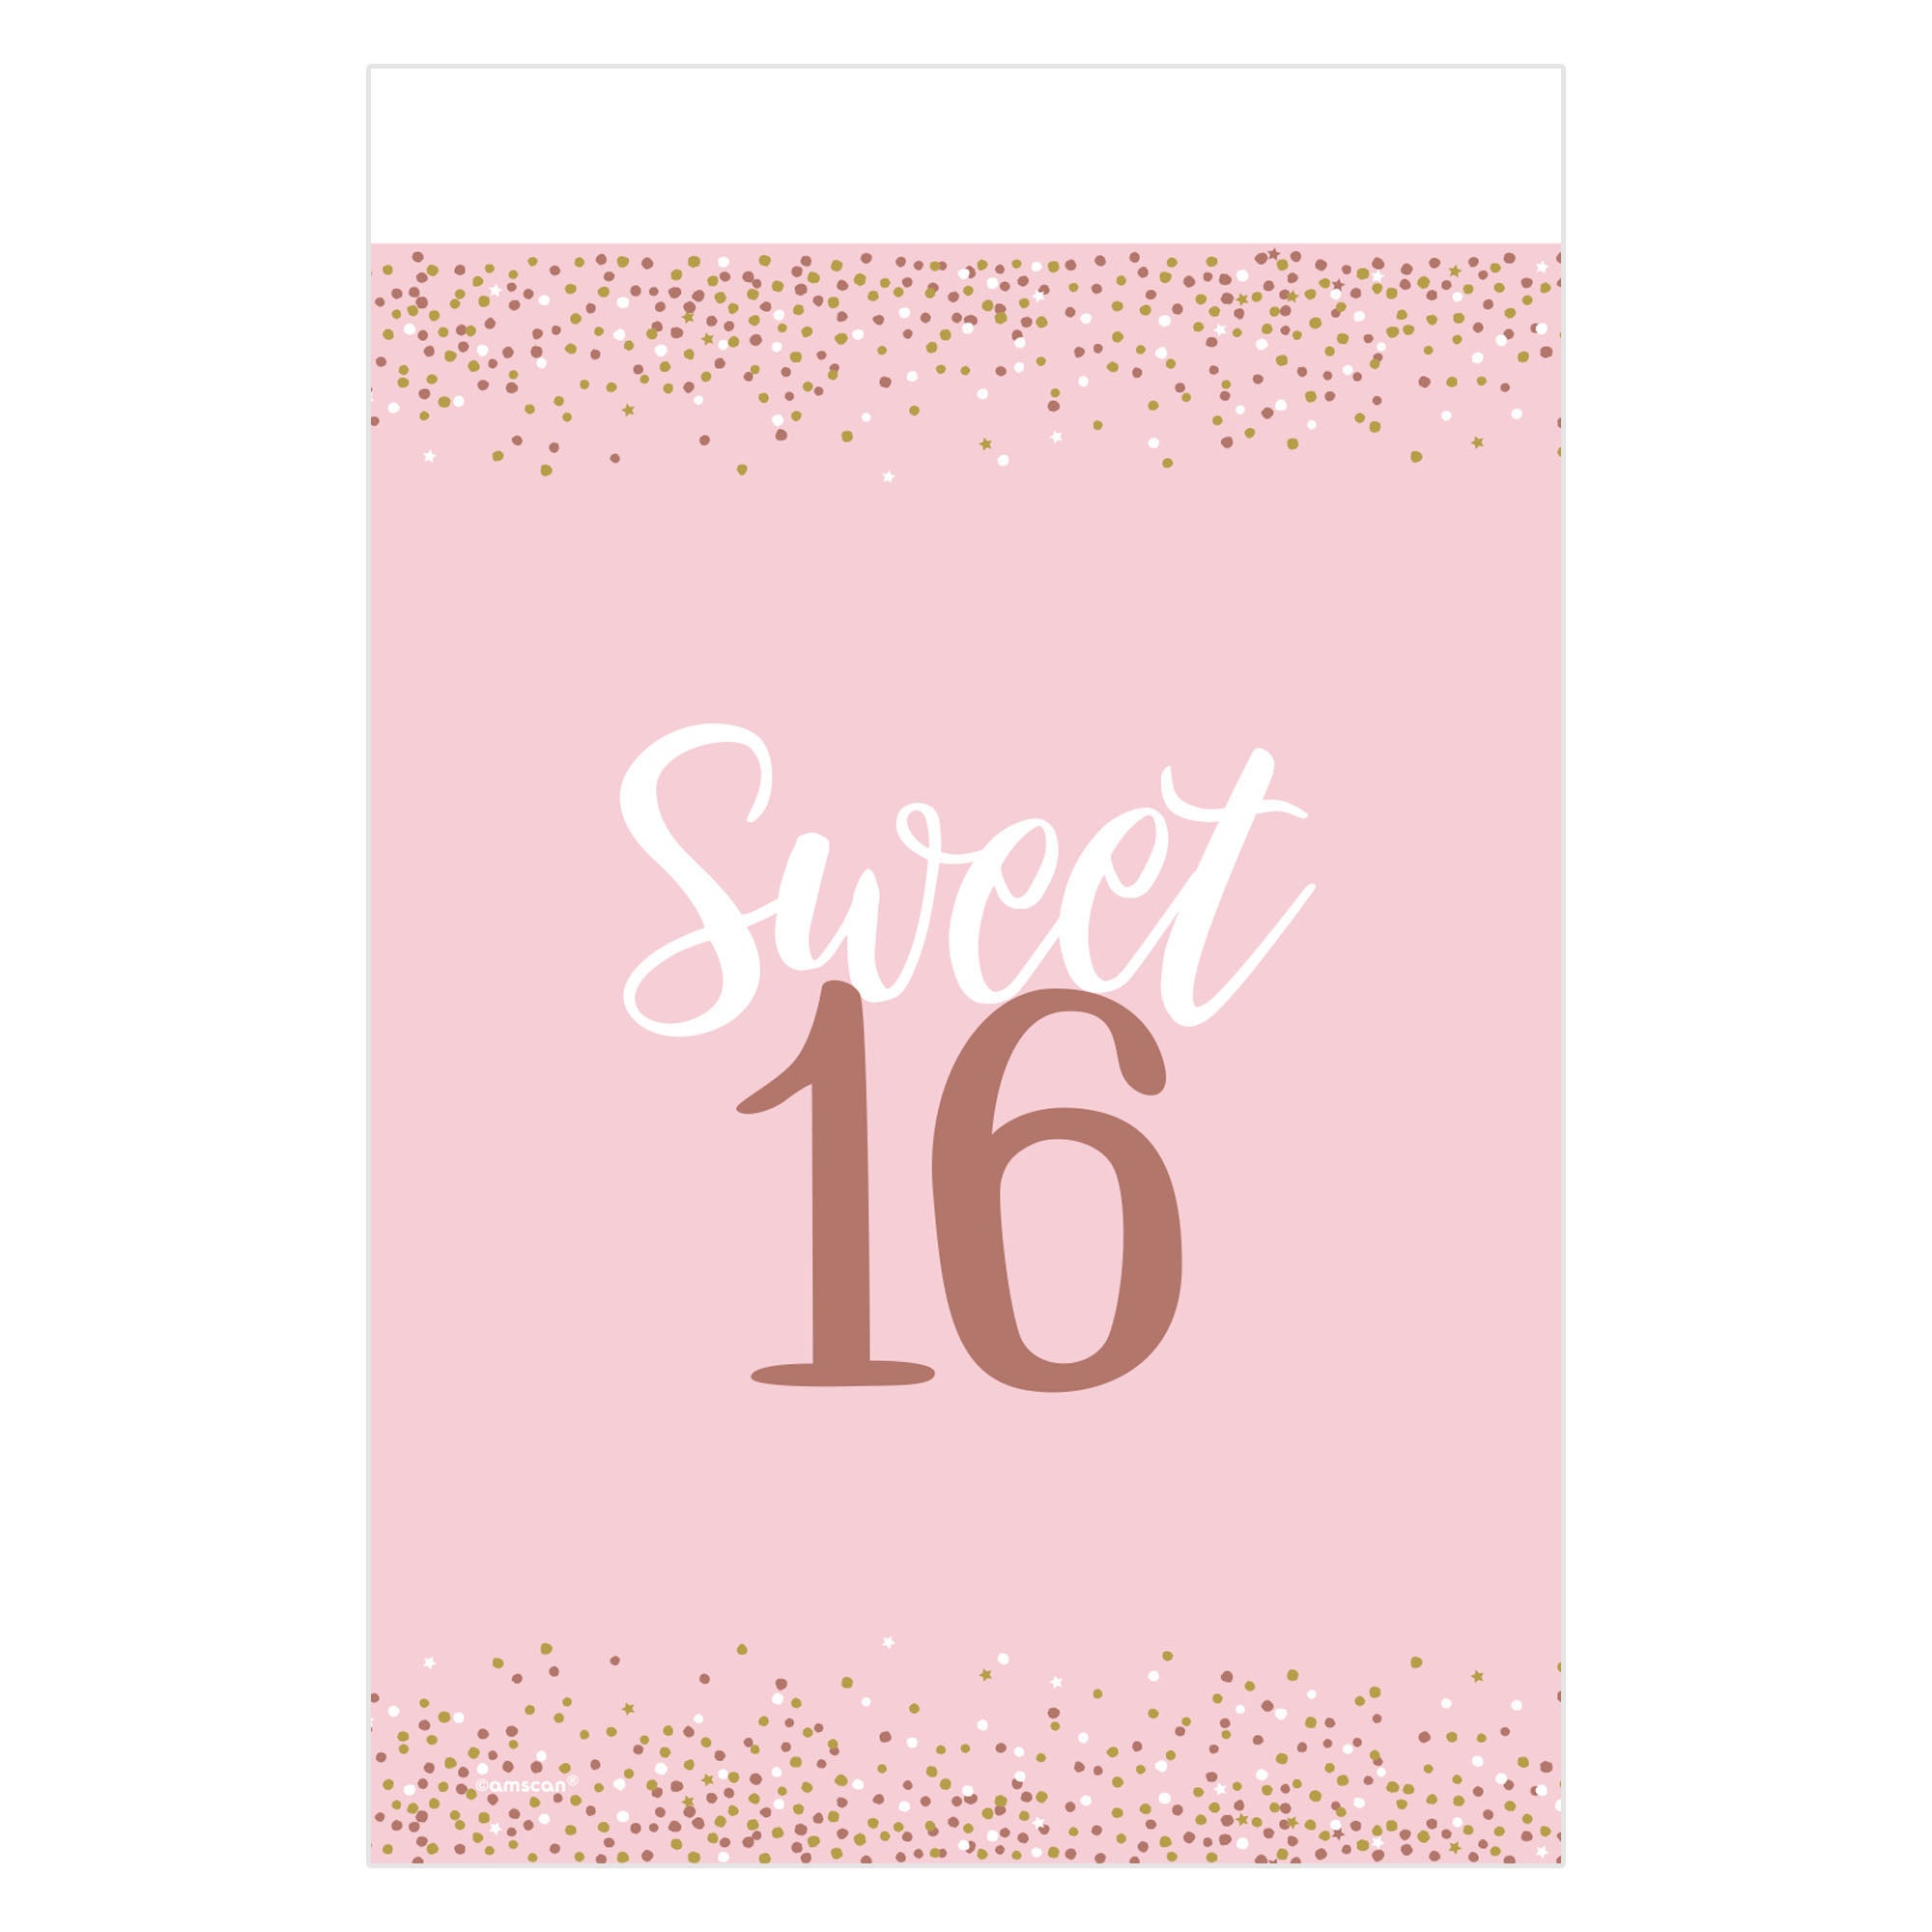 Blush Sweet Sixteen Plastic 54" x 102" Table Cover